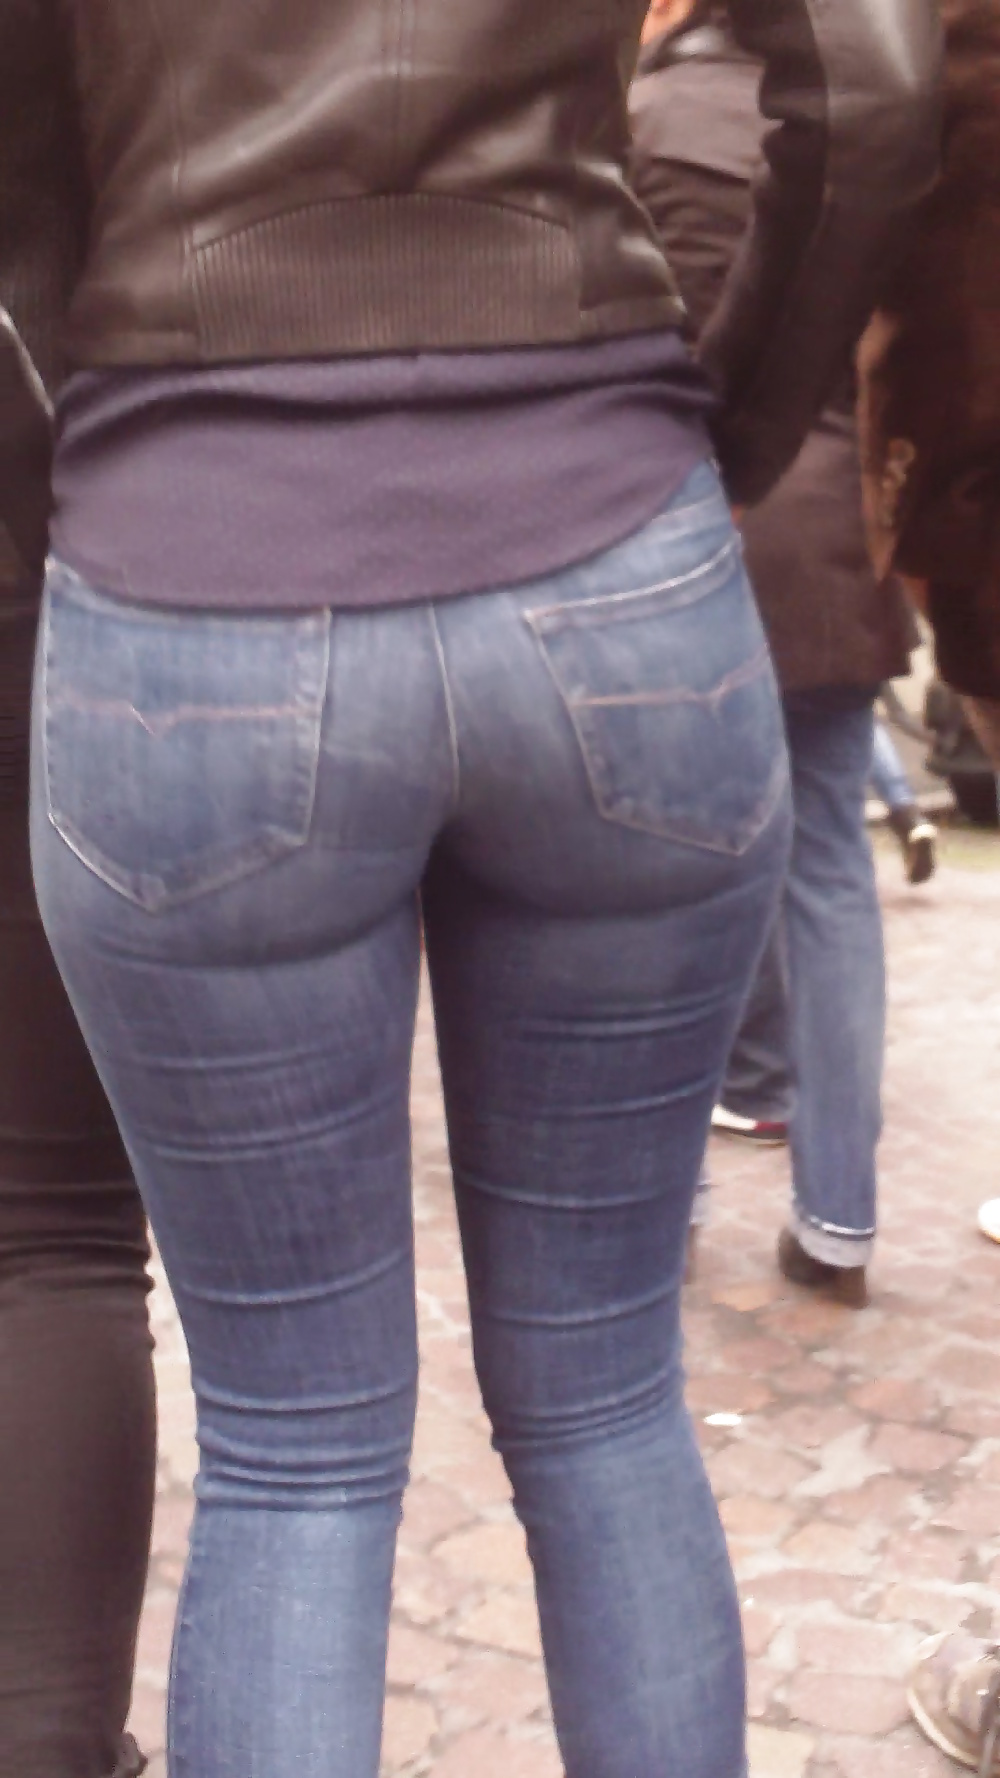 Nice big juicy teen ass & butt in very tight blue jeans  #31832248